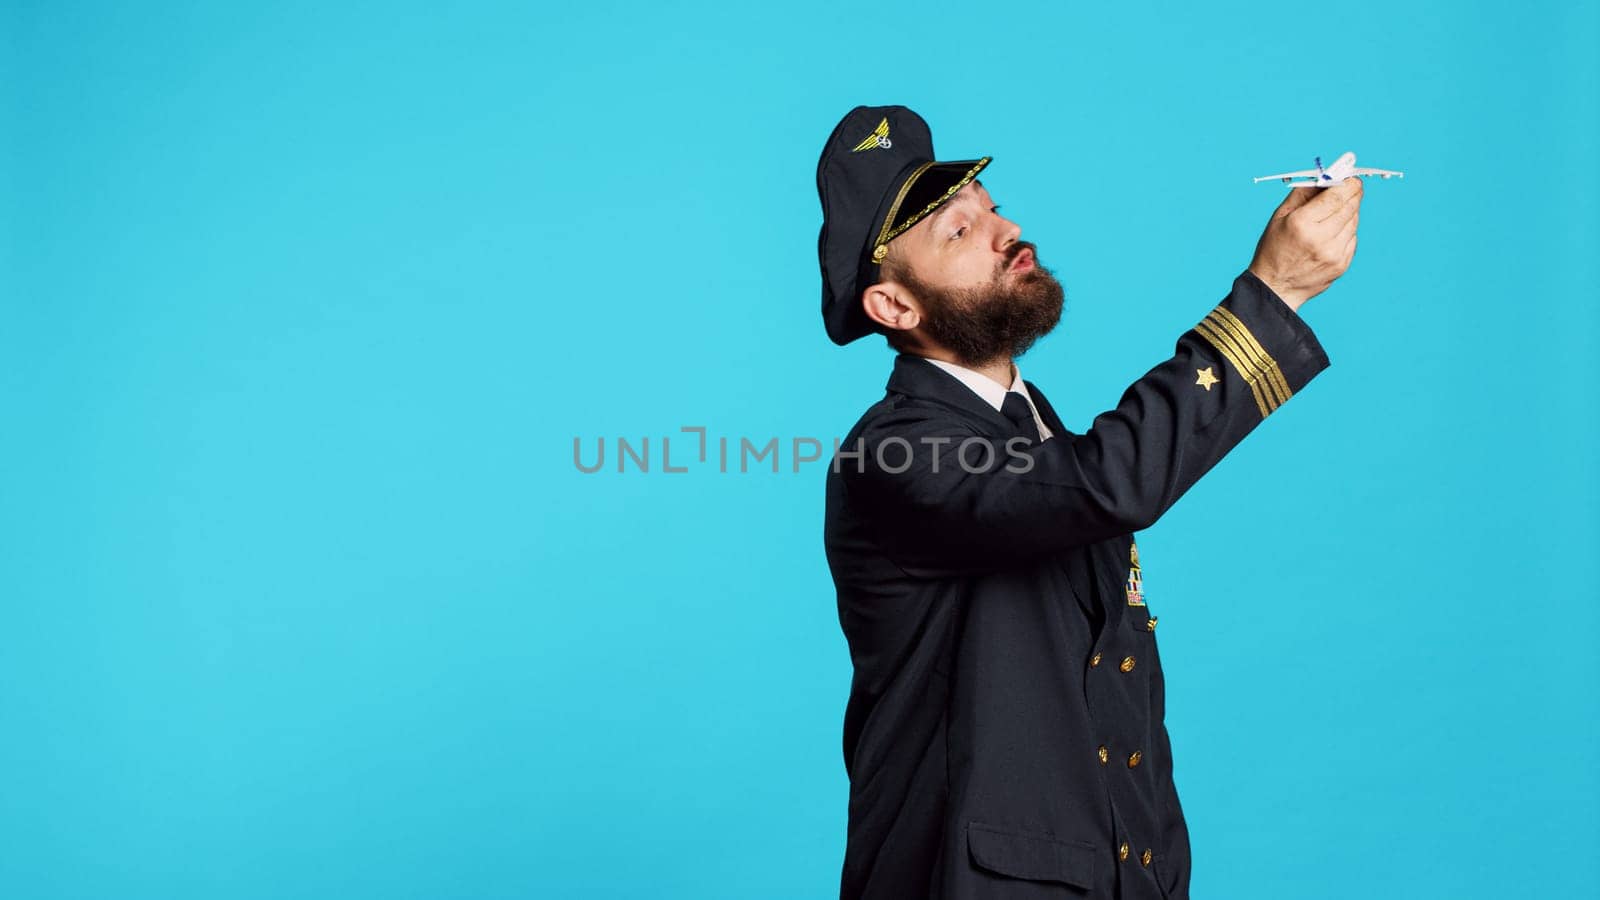 Caucasian man dressed as pilot playing with airplane toy by DCStudio